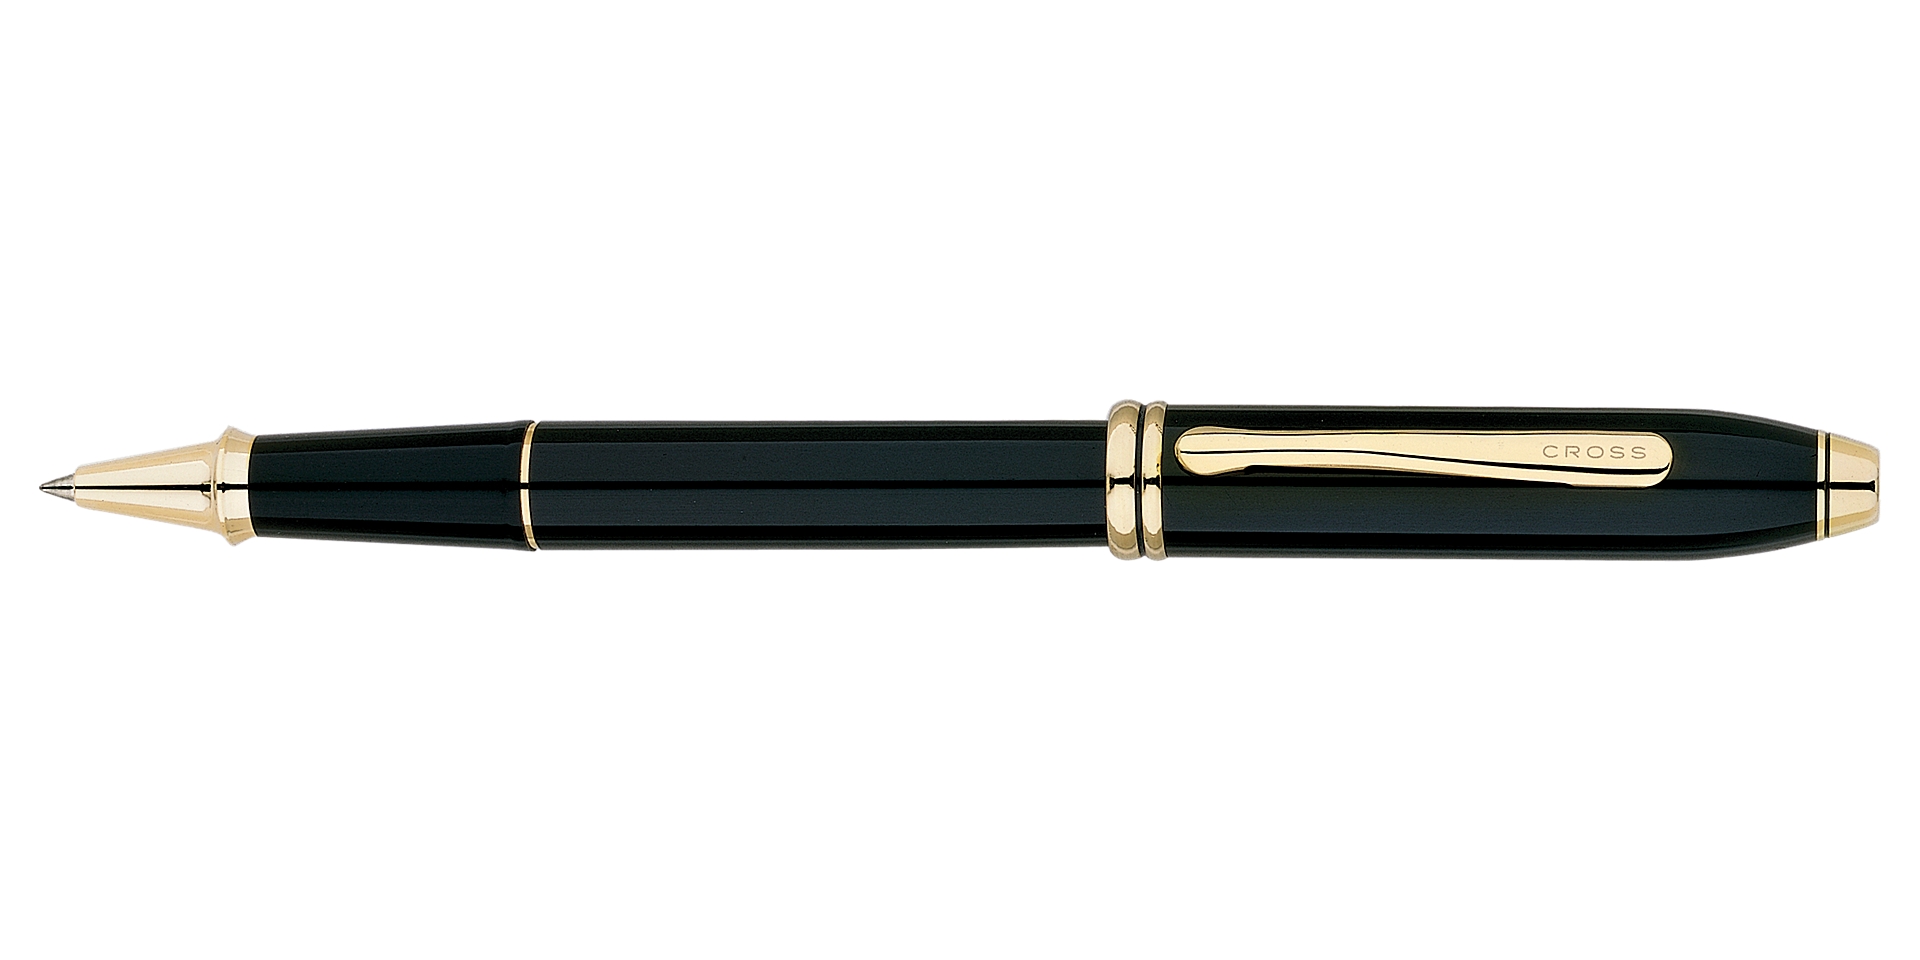  Townsend Black Lacquer Rollerball Pen